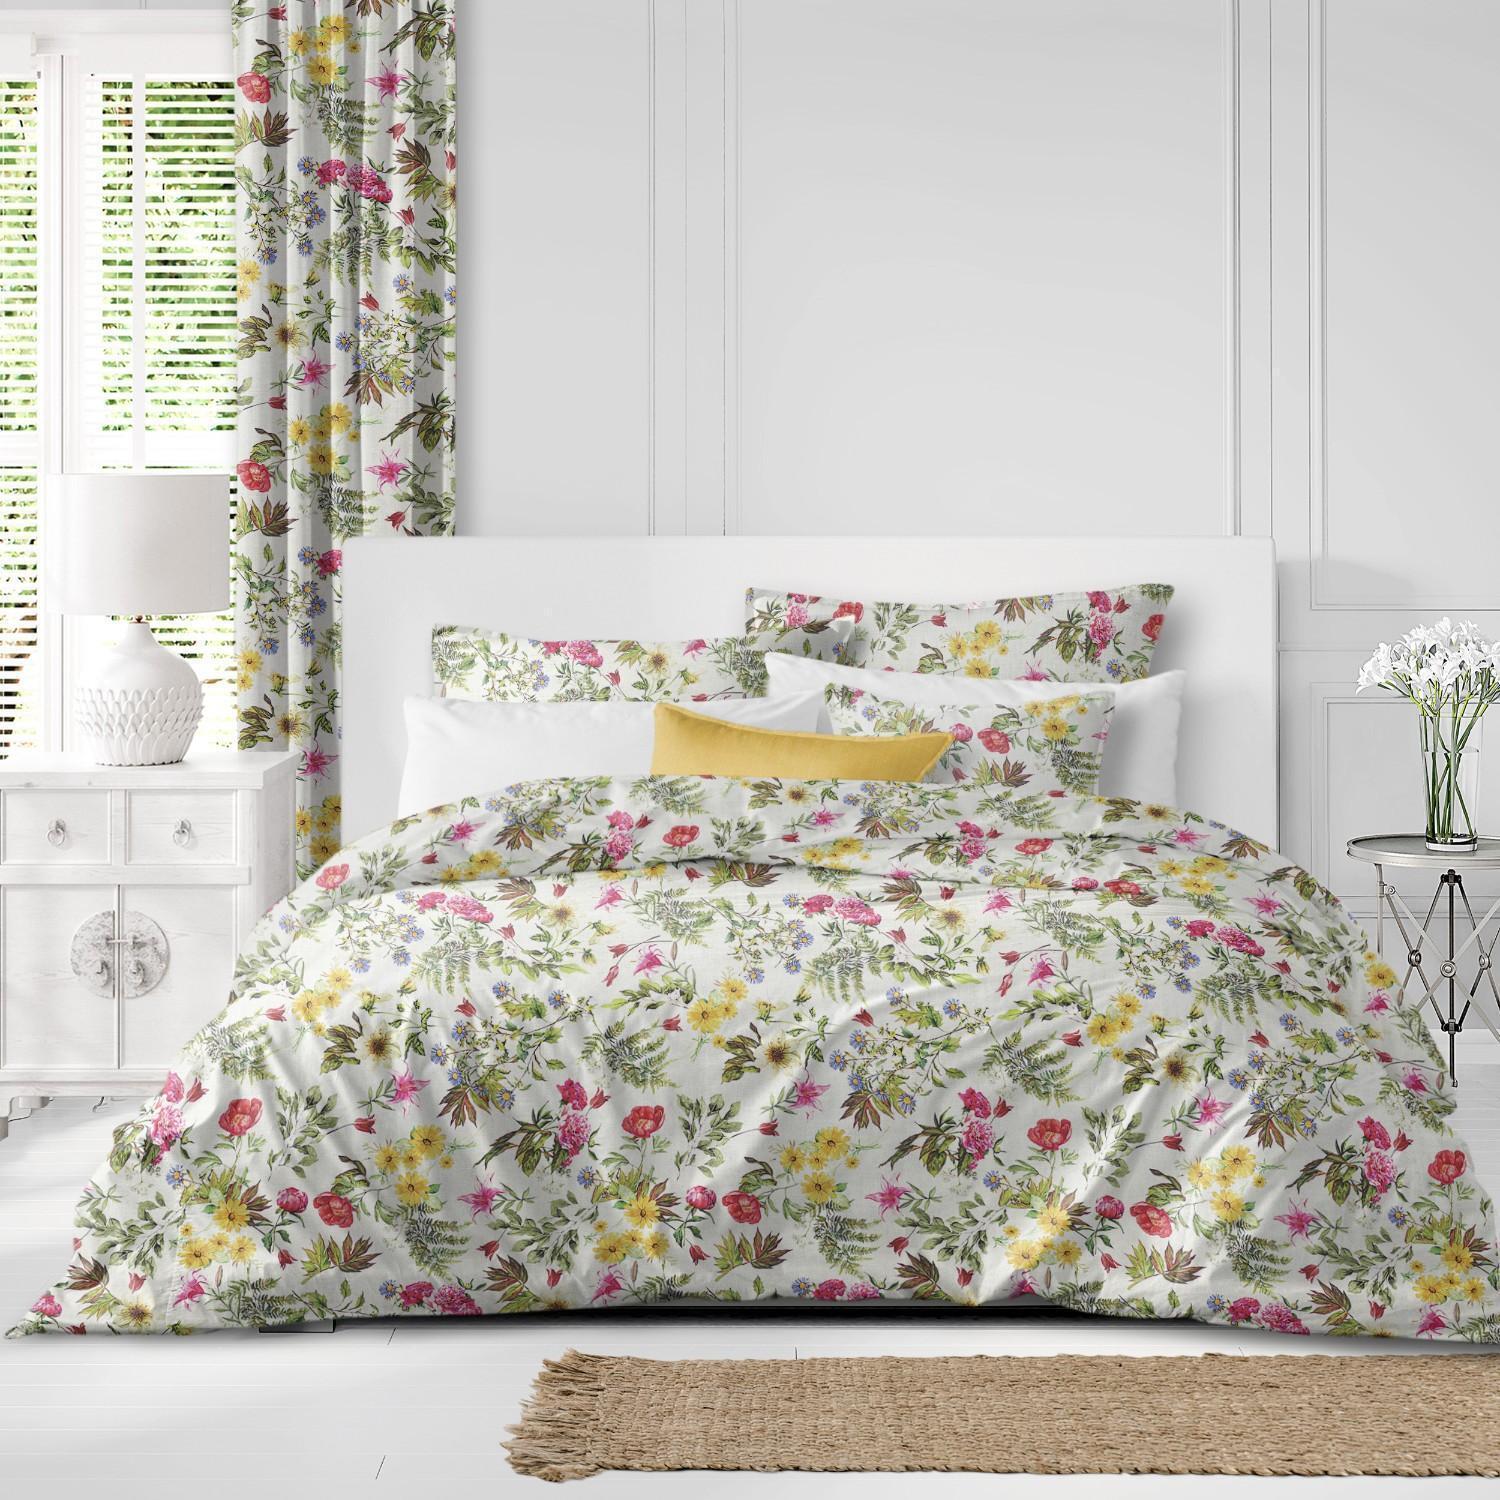 Set of 3 White and Pink Floral Comforter with Pillow Shams - King Size alternate image